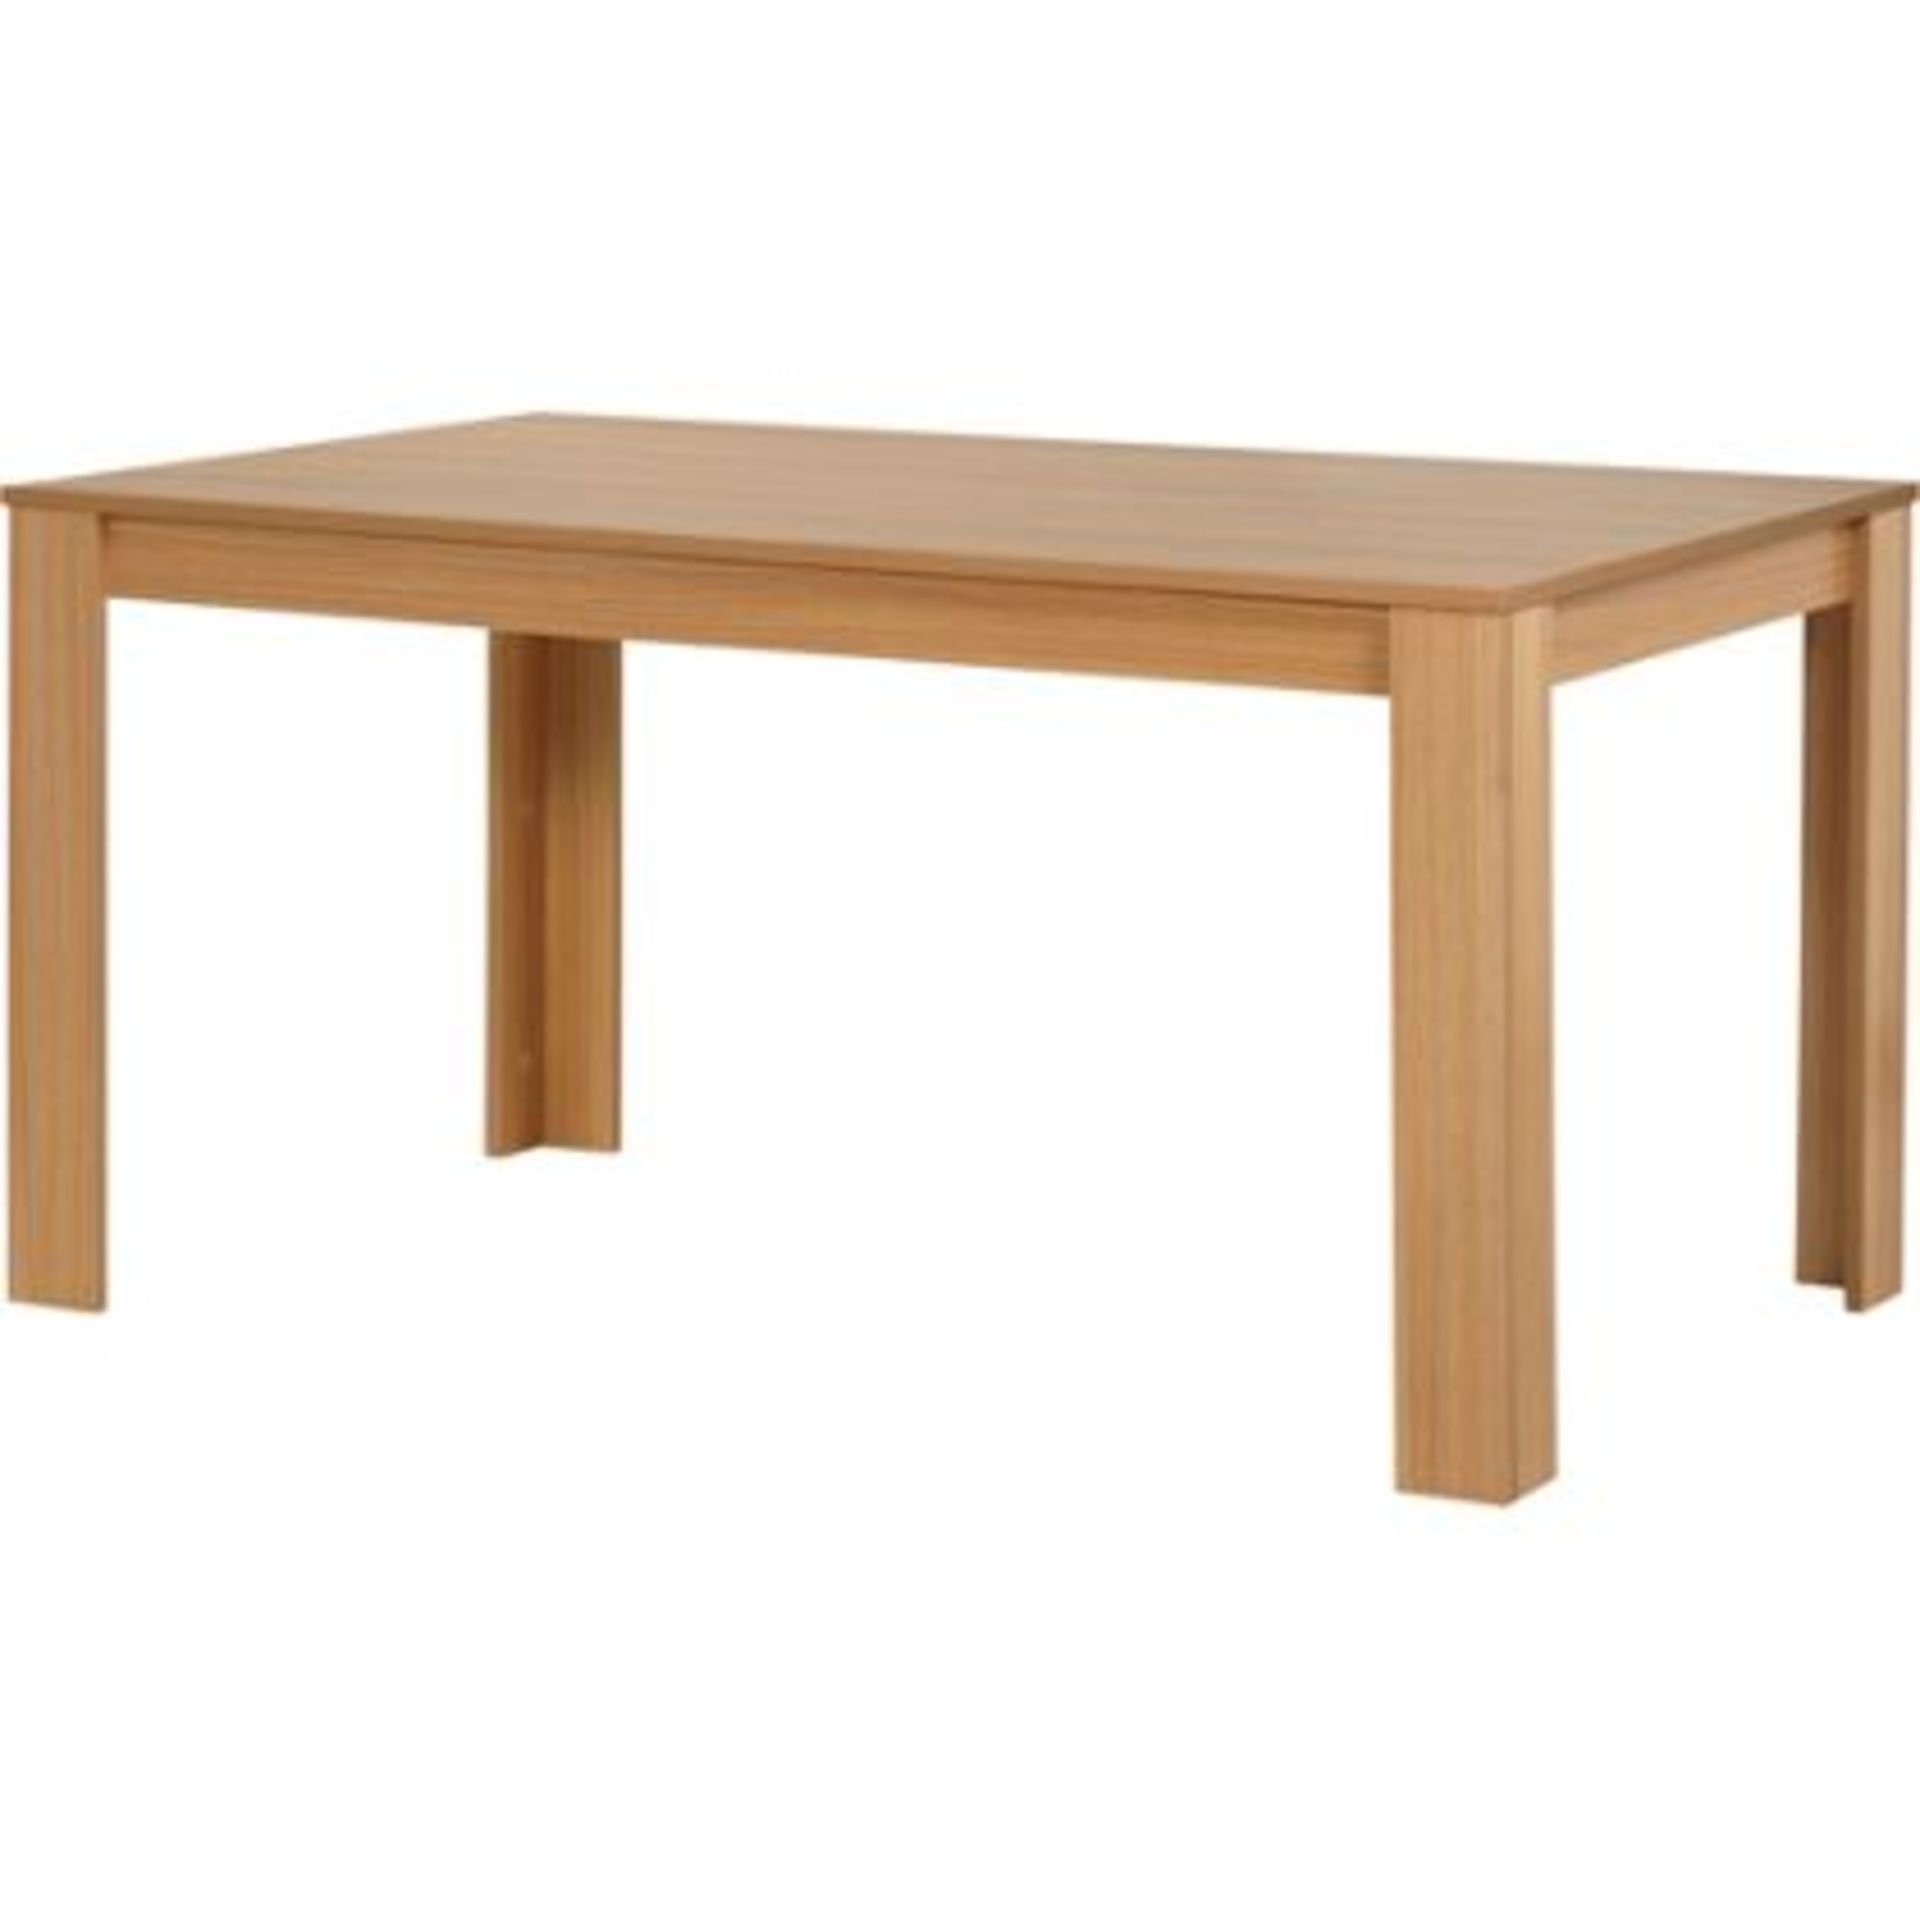 1 x Pallet to contain 14 x Campbell Oak Effect Tables. Brand new and Boxed. RRP £149.99 Each,